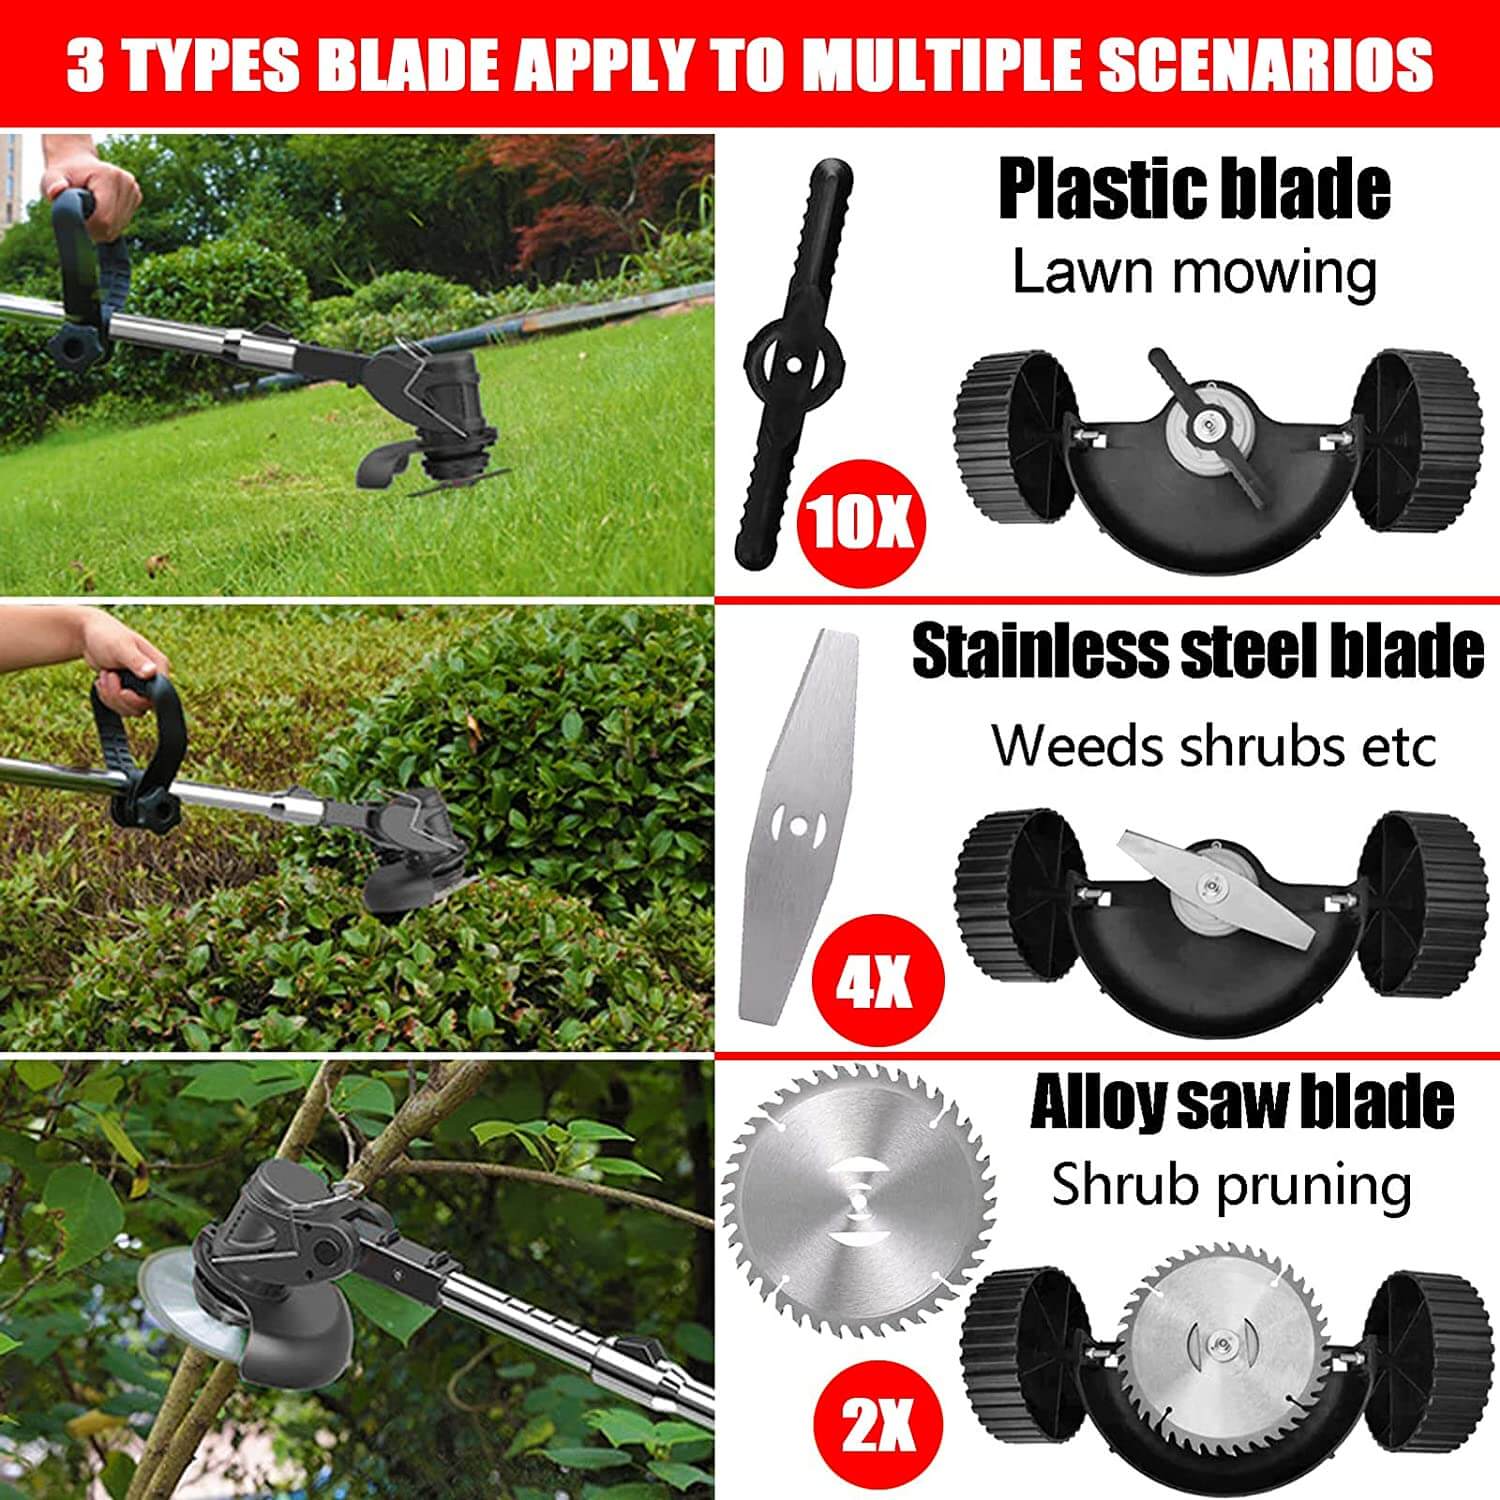 Our battery power Cordless weed eater comes with 3 types blades.① Stainless steel metal blades for cutting thick weed and small shrubs. ② Circular saw blades for cutting thicker shrub, branches, sapling . ③ Plastic blades are suitable for mowing soft grass and other light stuff.